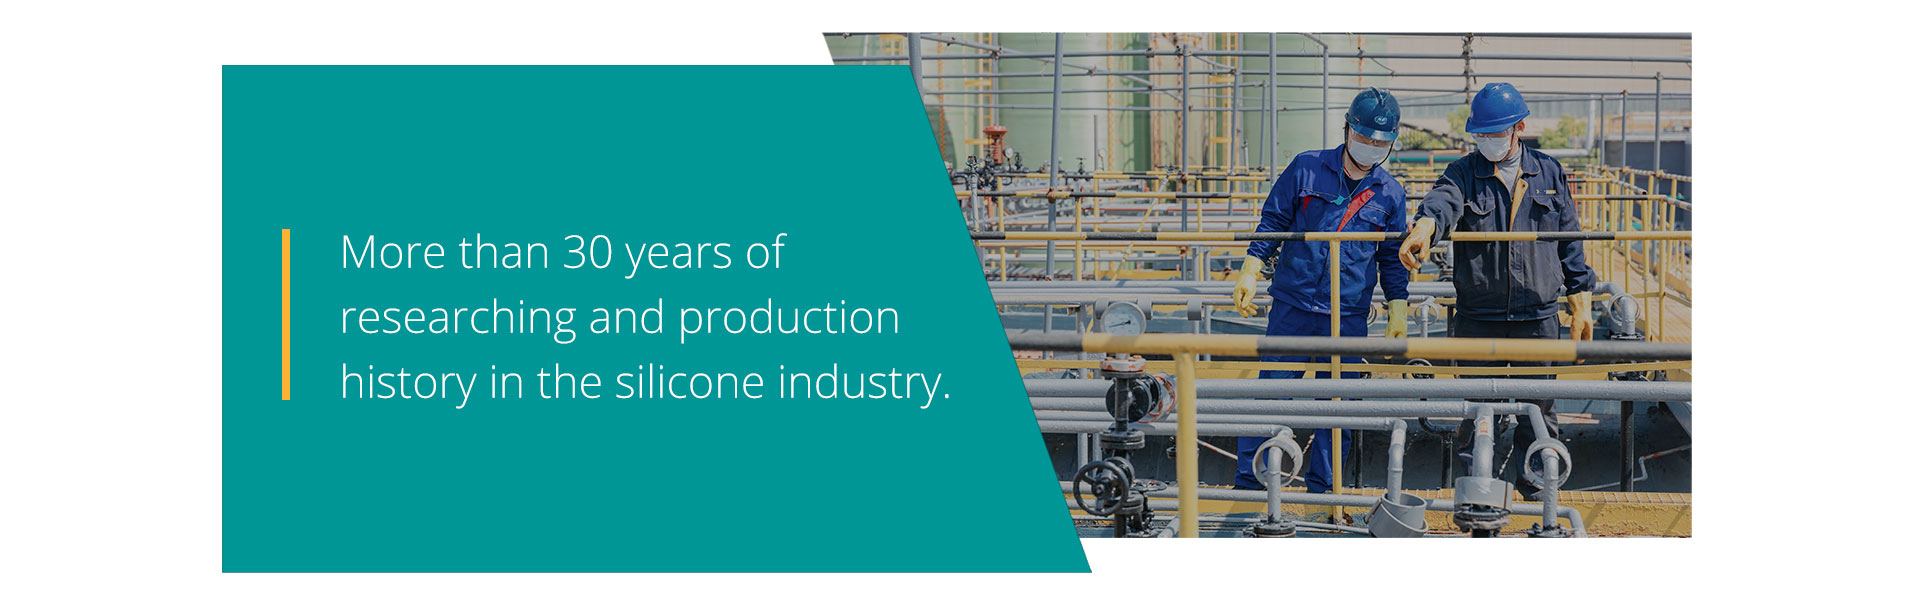 More than 30years of researching and production history in the silicone industry